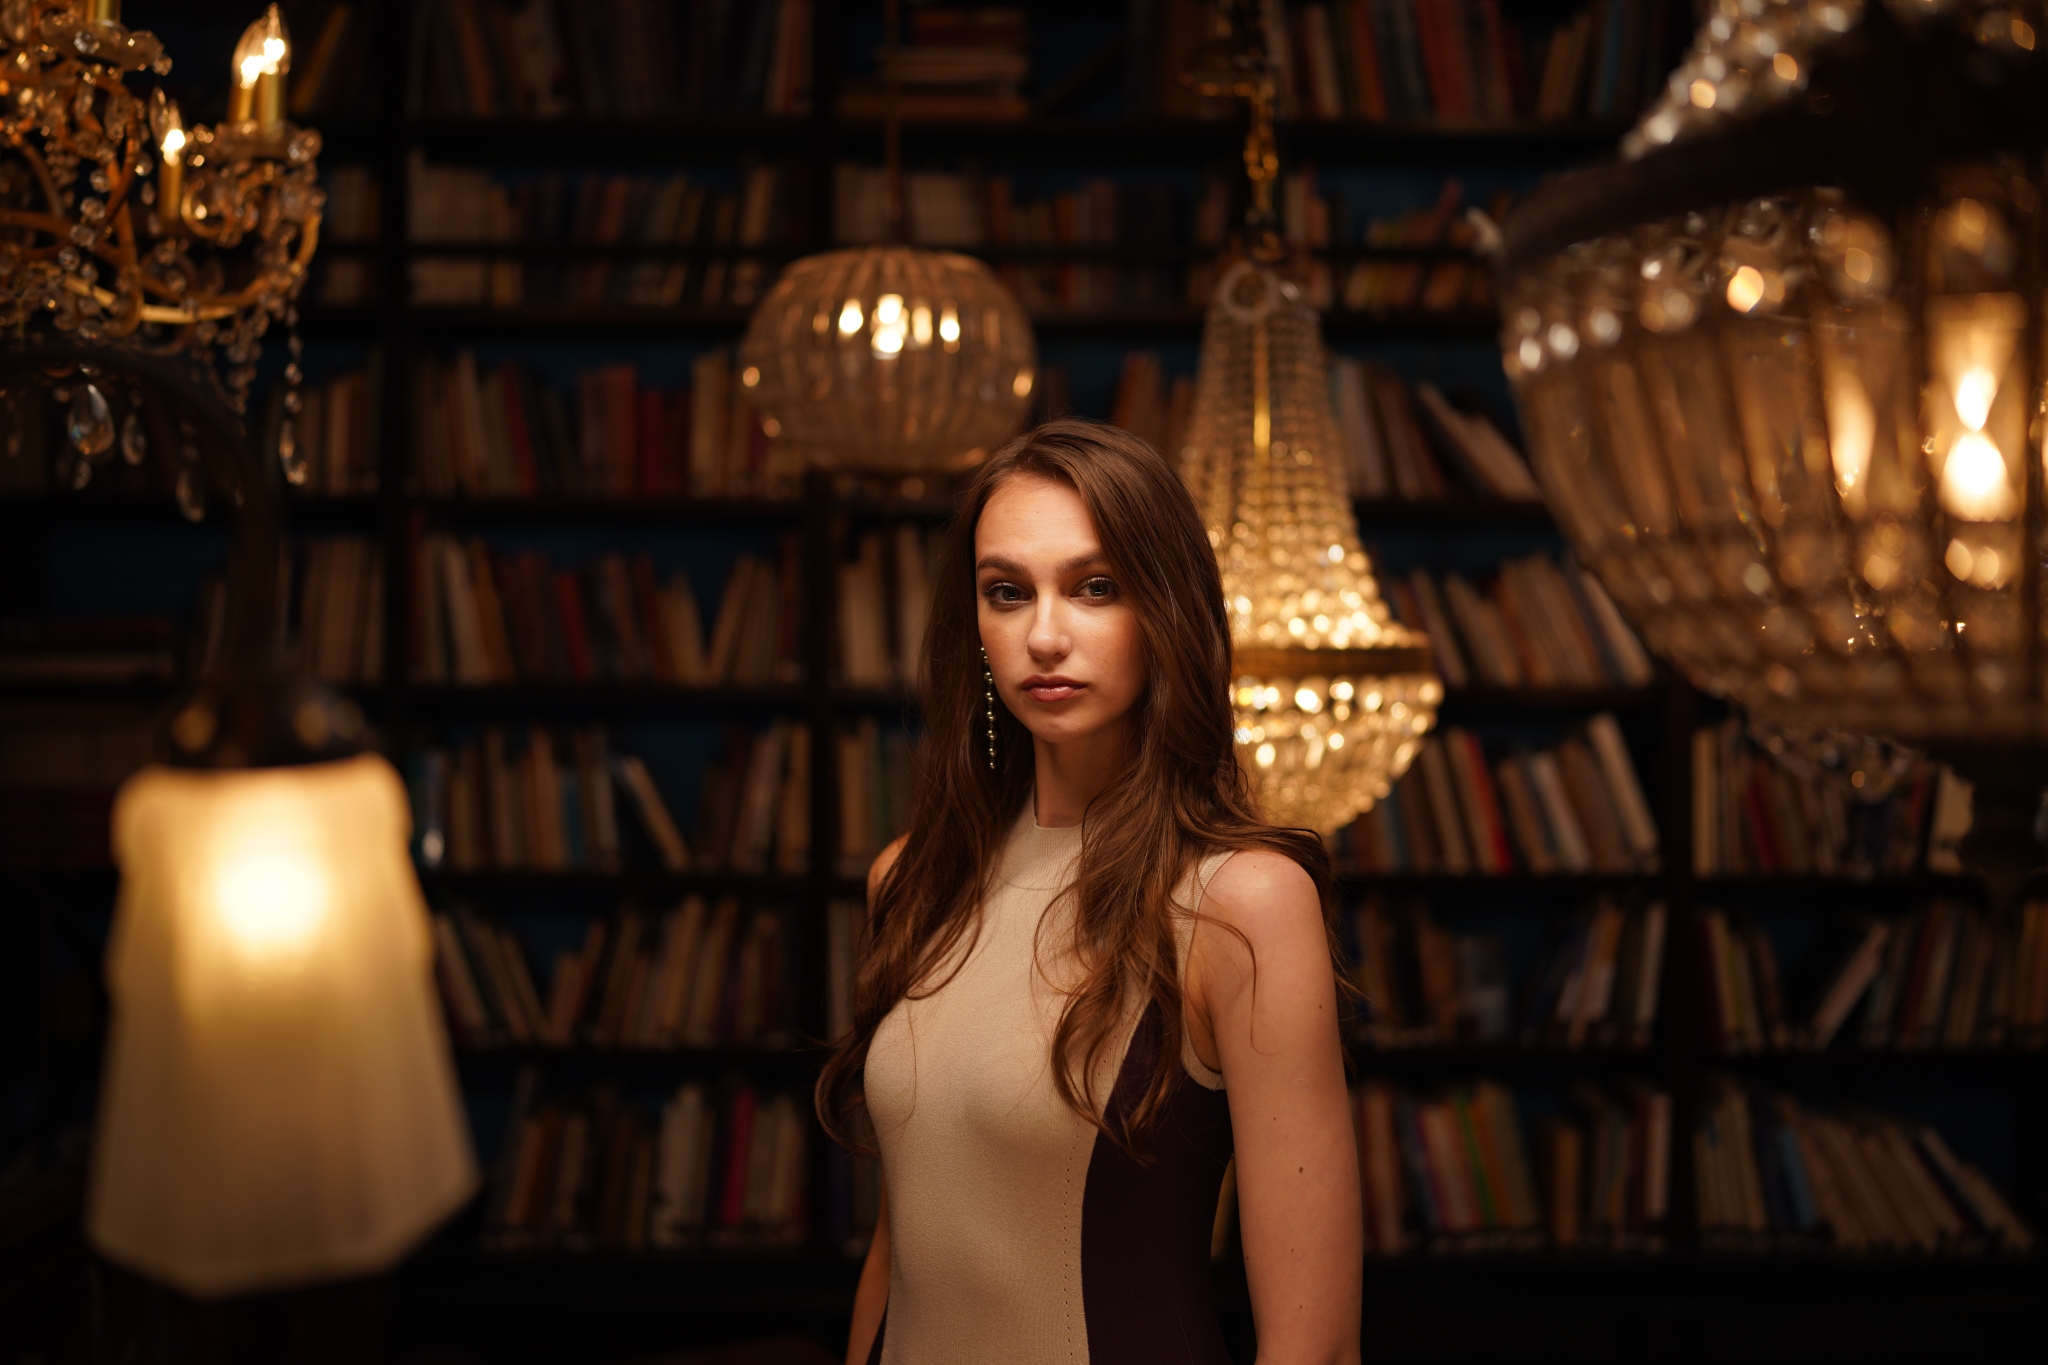 Female model in a dimly lit room with hanging lights and bookshelves